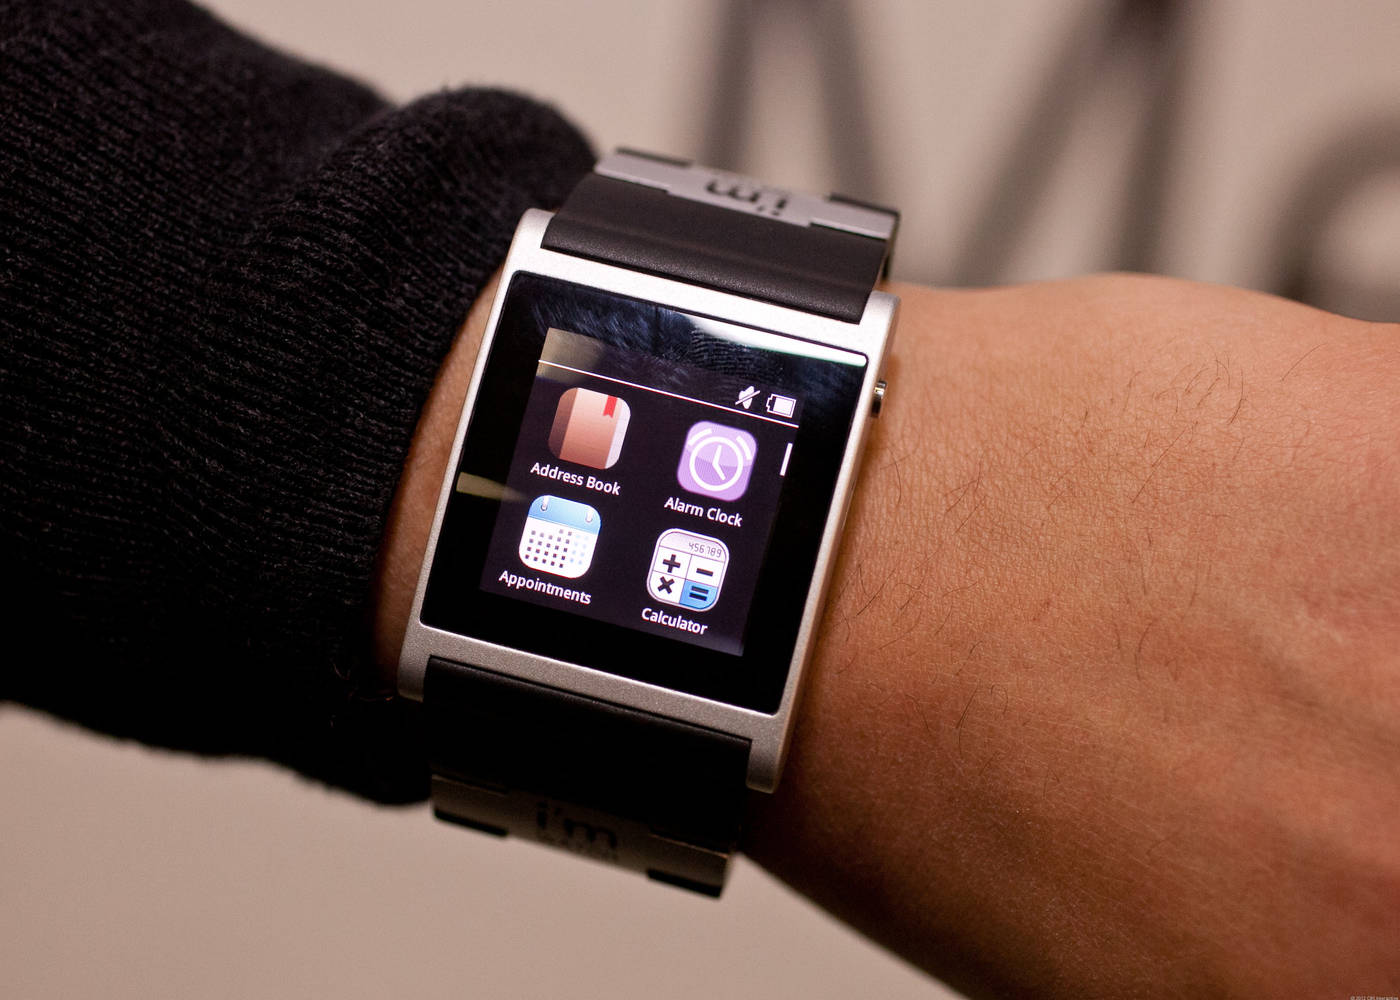 Samsung Galaxy Gear specs and images - 2